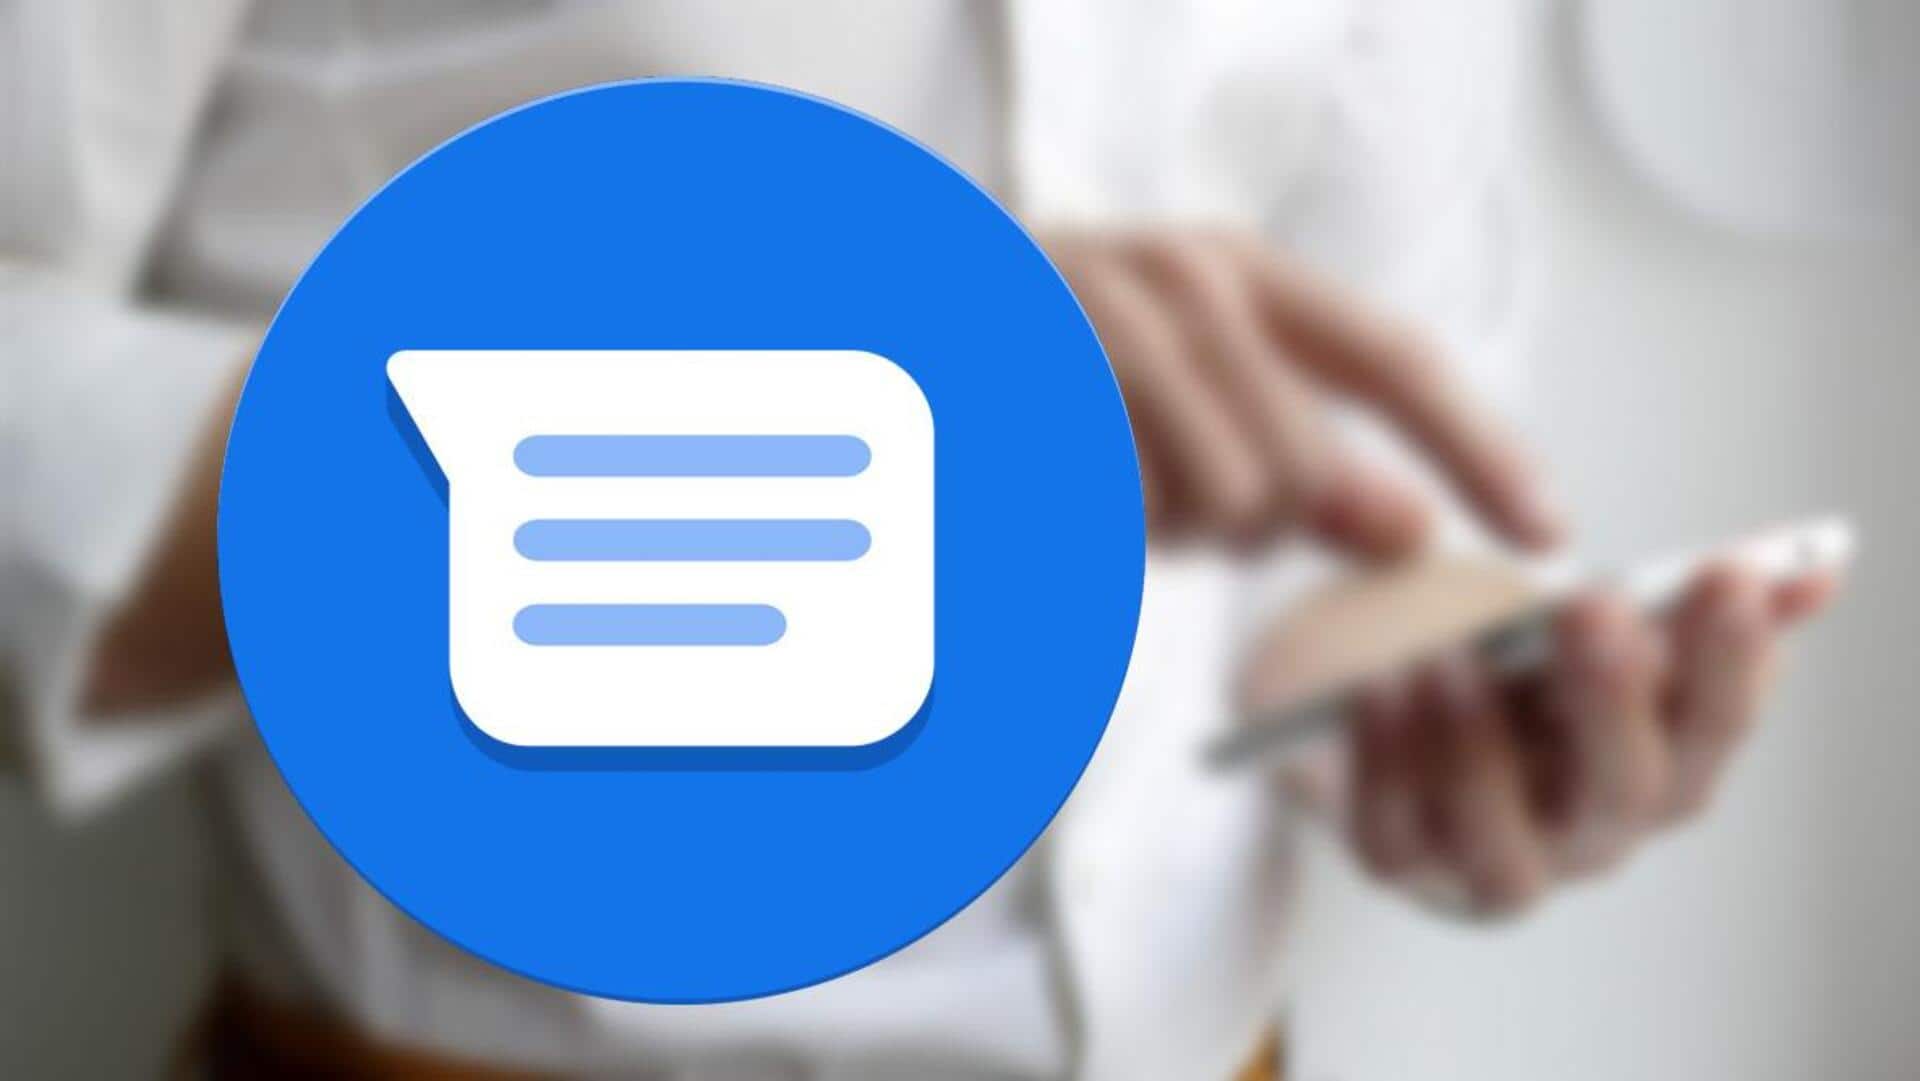 Google Messages introduces background wallpaper for RCS chats